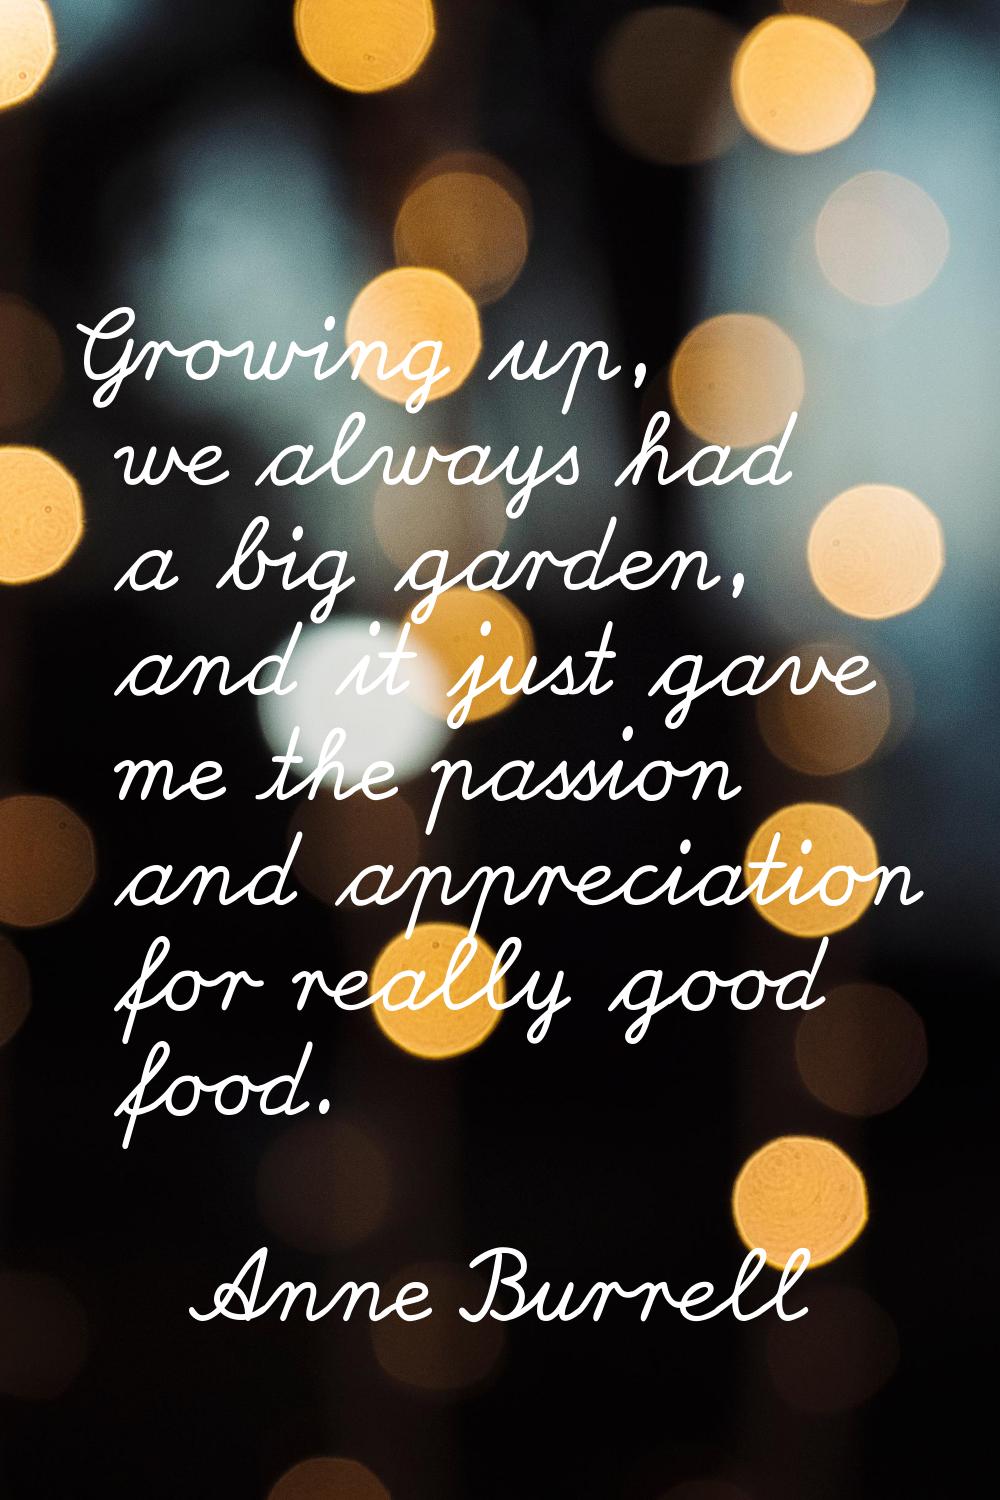 Growing up, we always had a big garden, and it just gave me the passion and appreciation for really